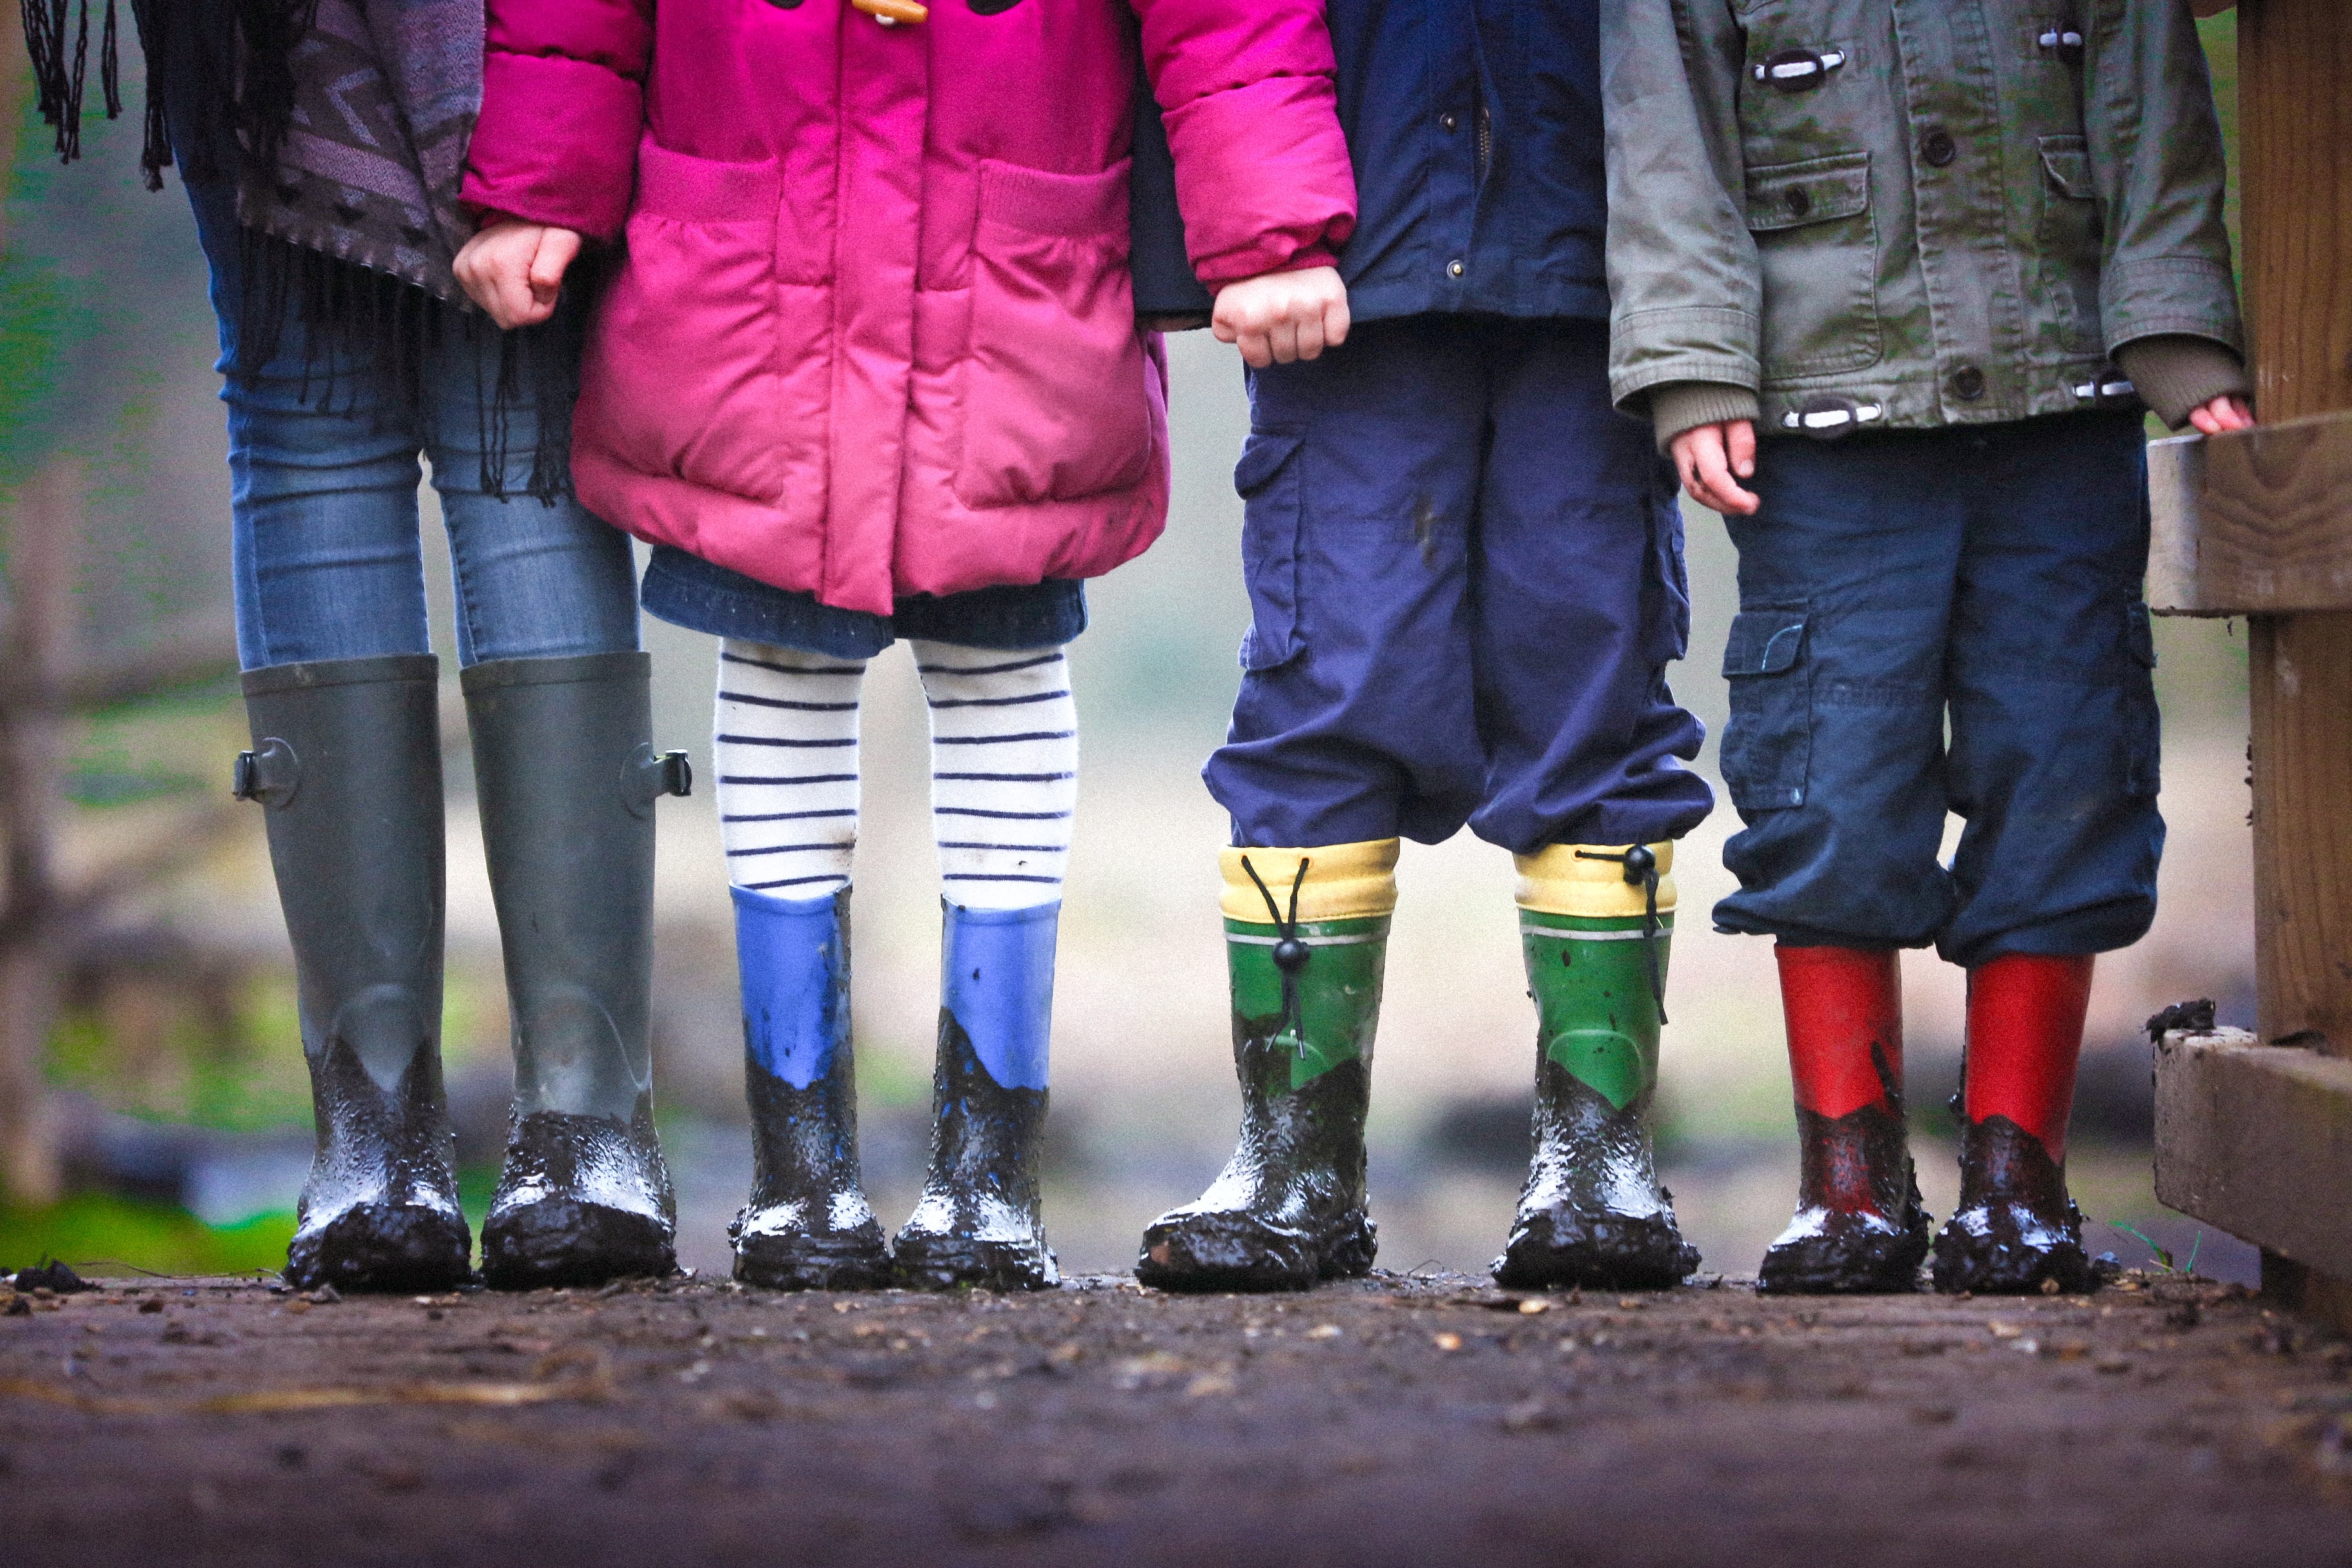 Managing the custody of children is focus of article; image features legs of 4 children wearing boots